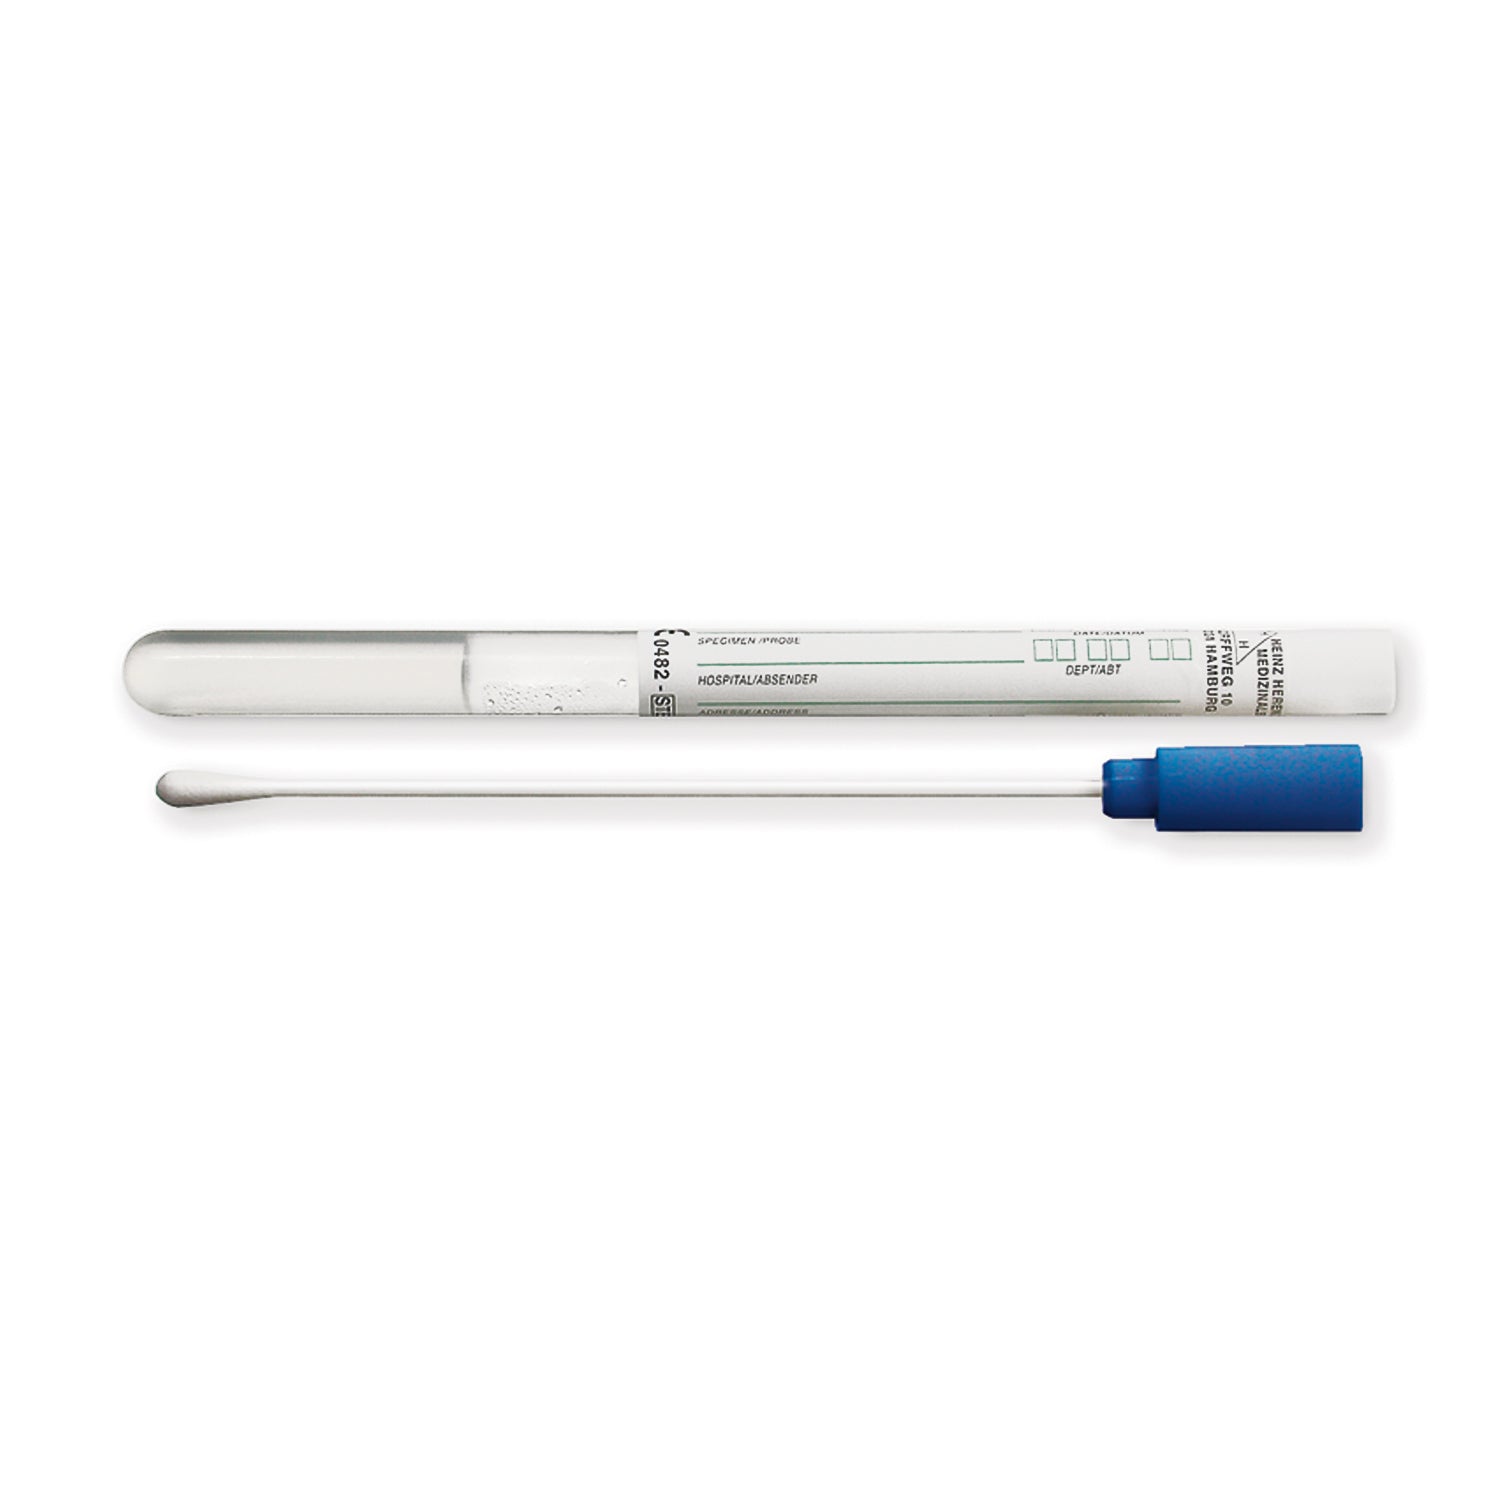 Swab Kit With Amies Medium For Hygienic Collection & Storage